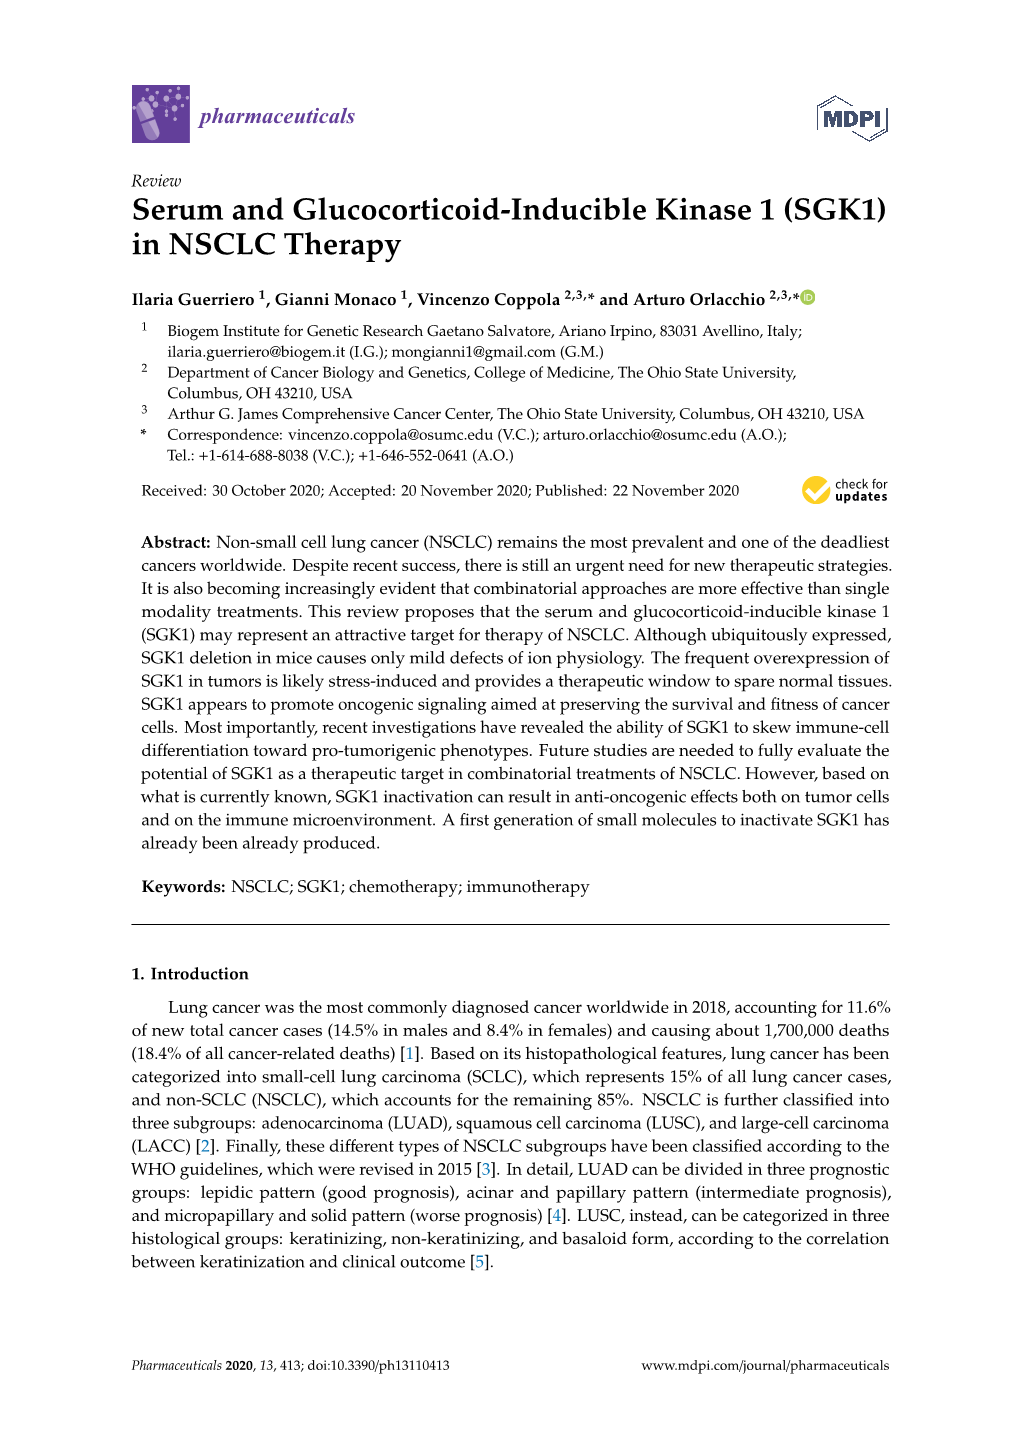 Serum and Glucocorticoid-Inducible Kinase 1 (SGK1) in NSCLC Therapy